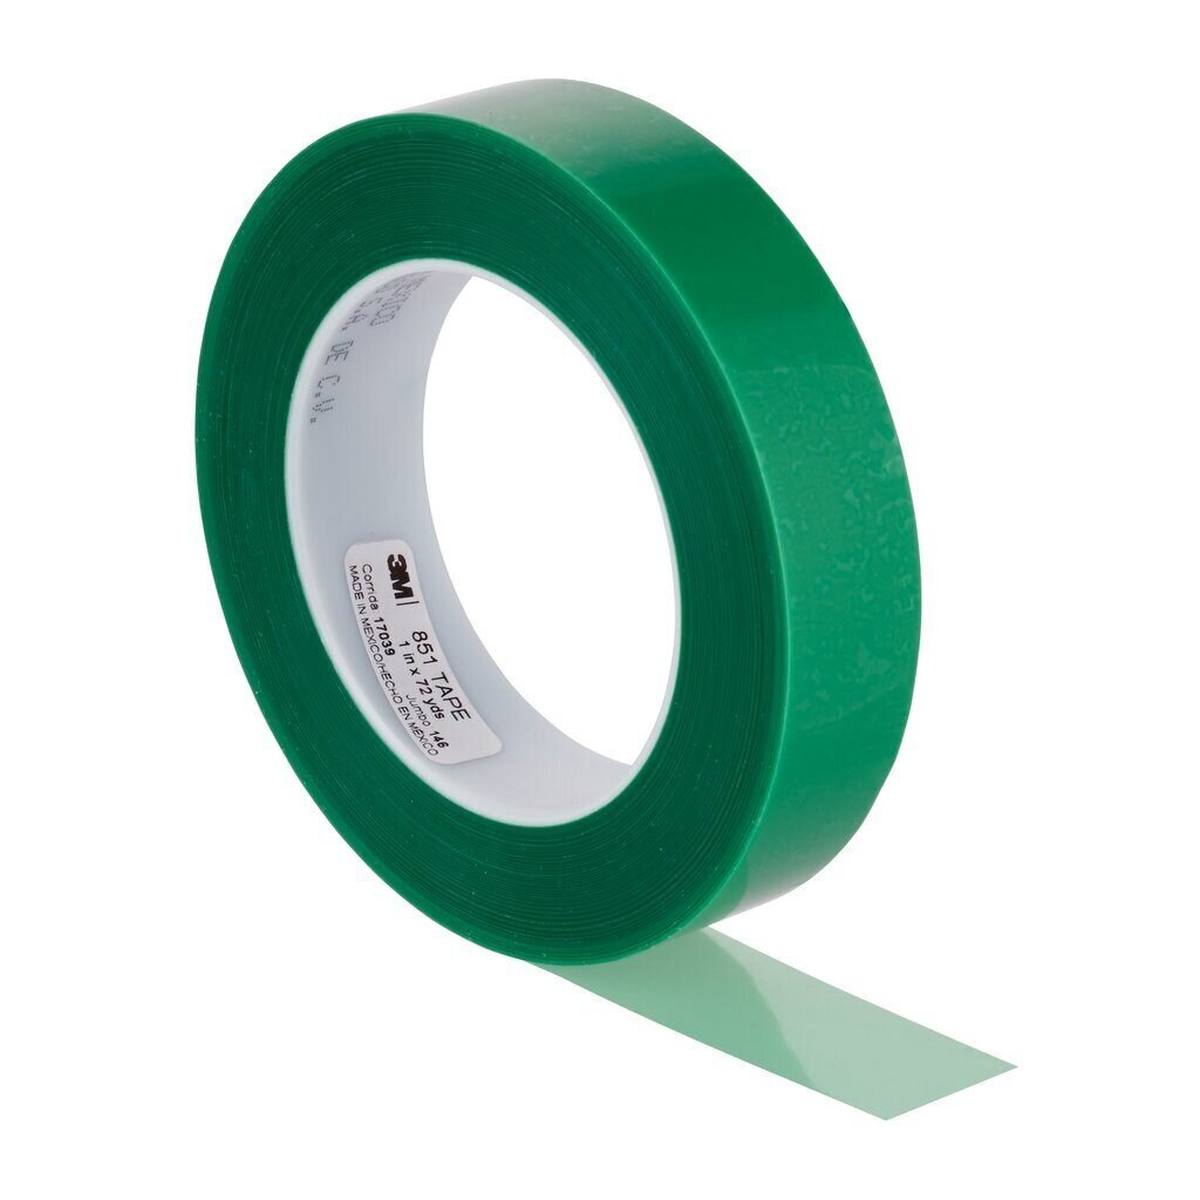 3M high temperature polyester adhesive tape 851, green, 25.4 mm x 66 m, 101.6 µm